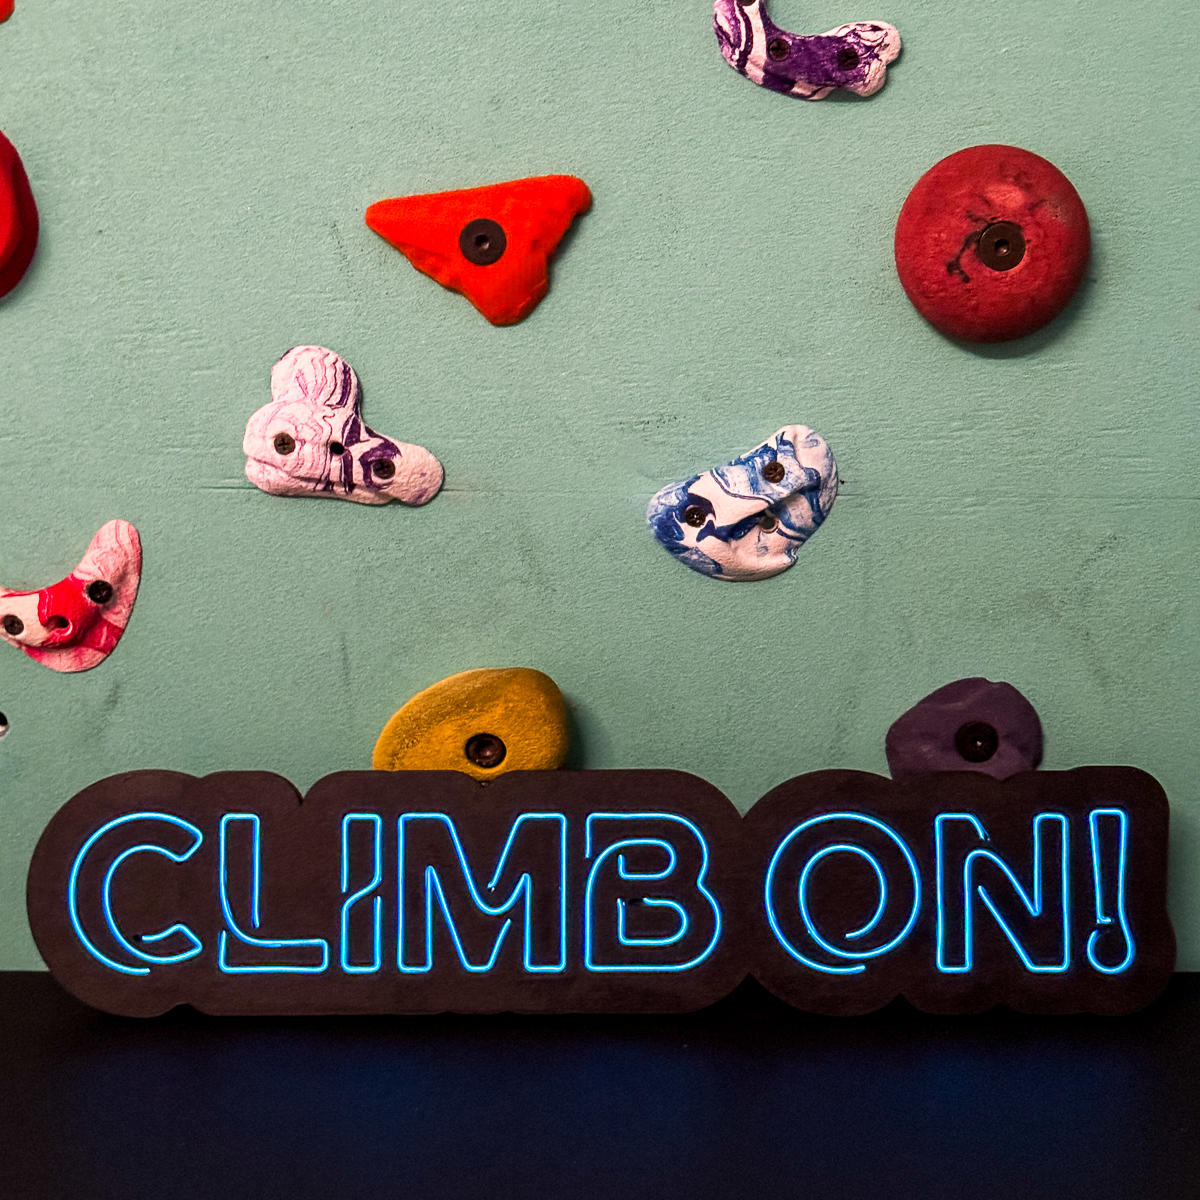 DIY LED neon sign that says "Climb on!" in front of a climbing wall